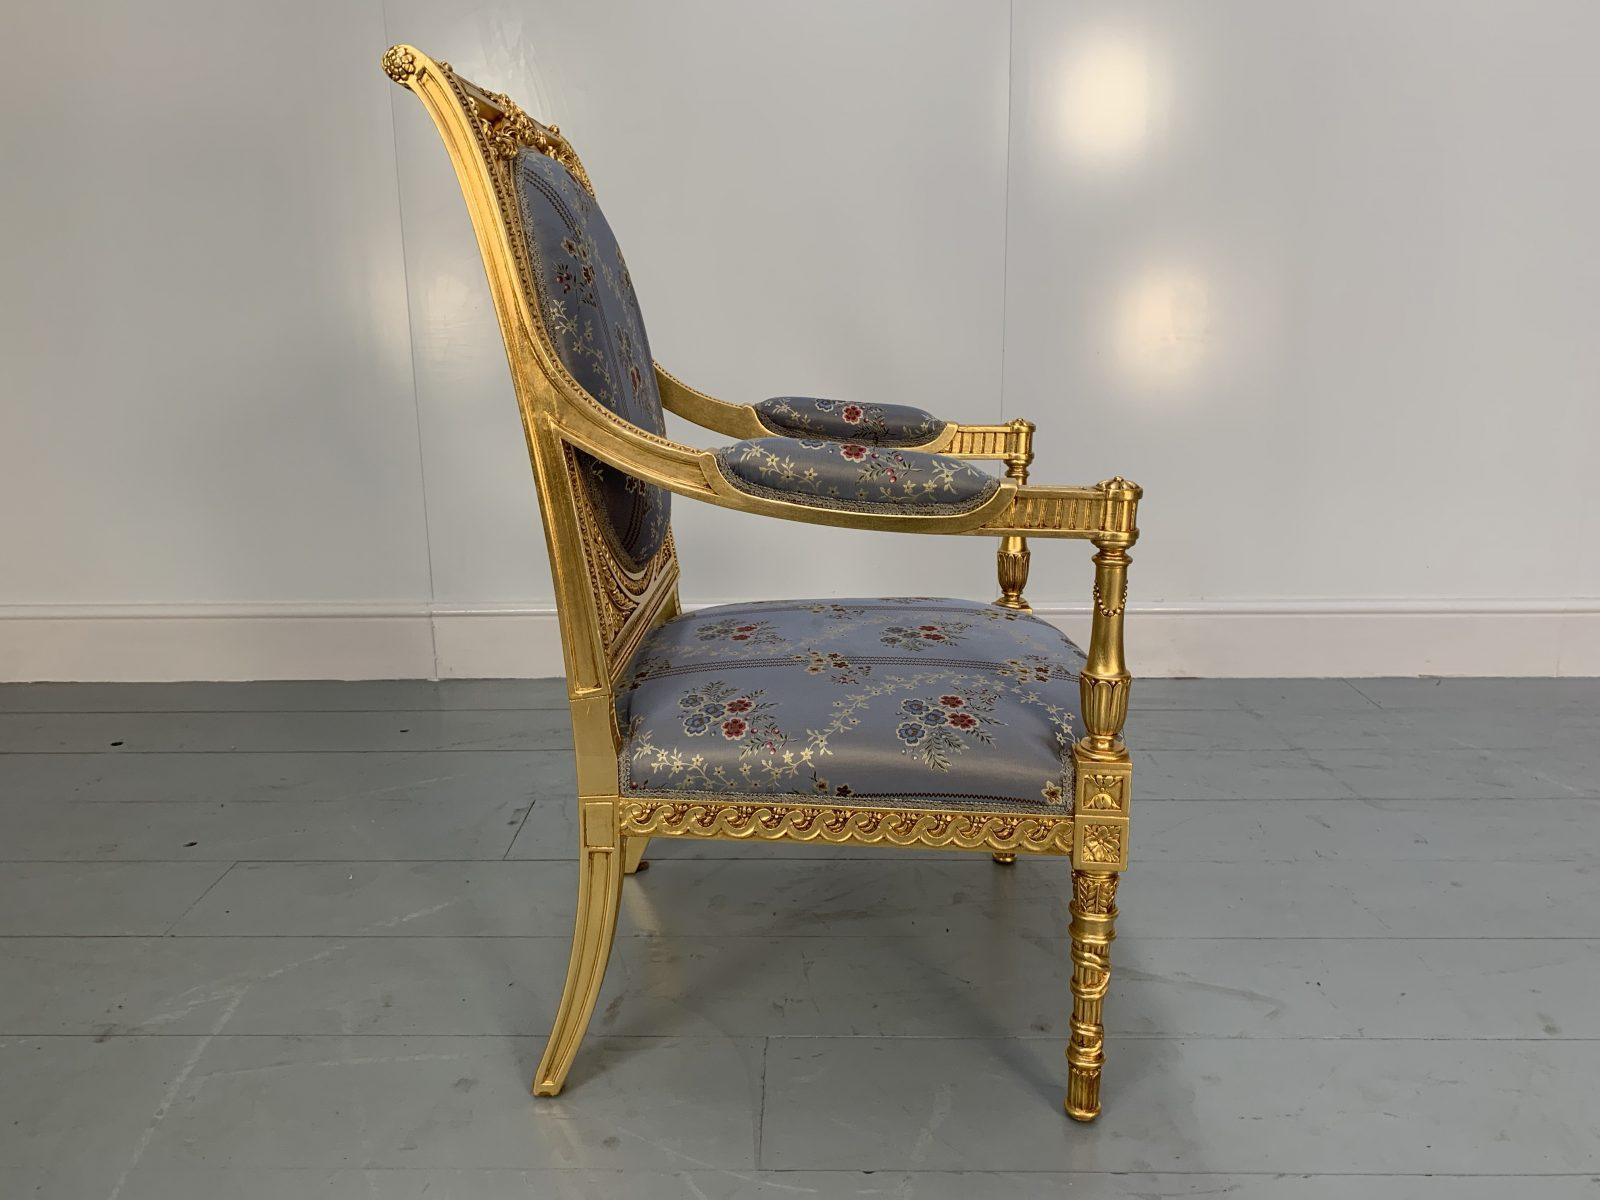 Pair of Peerless Asnaghi Fauteuil Baroque Rococo Armchairs in Floral Silk and Gi In Good Condition For Sale In Barrowford, GB